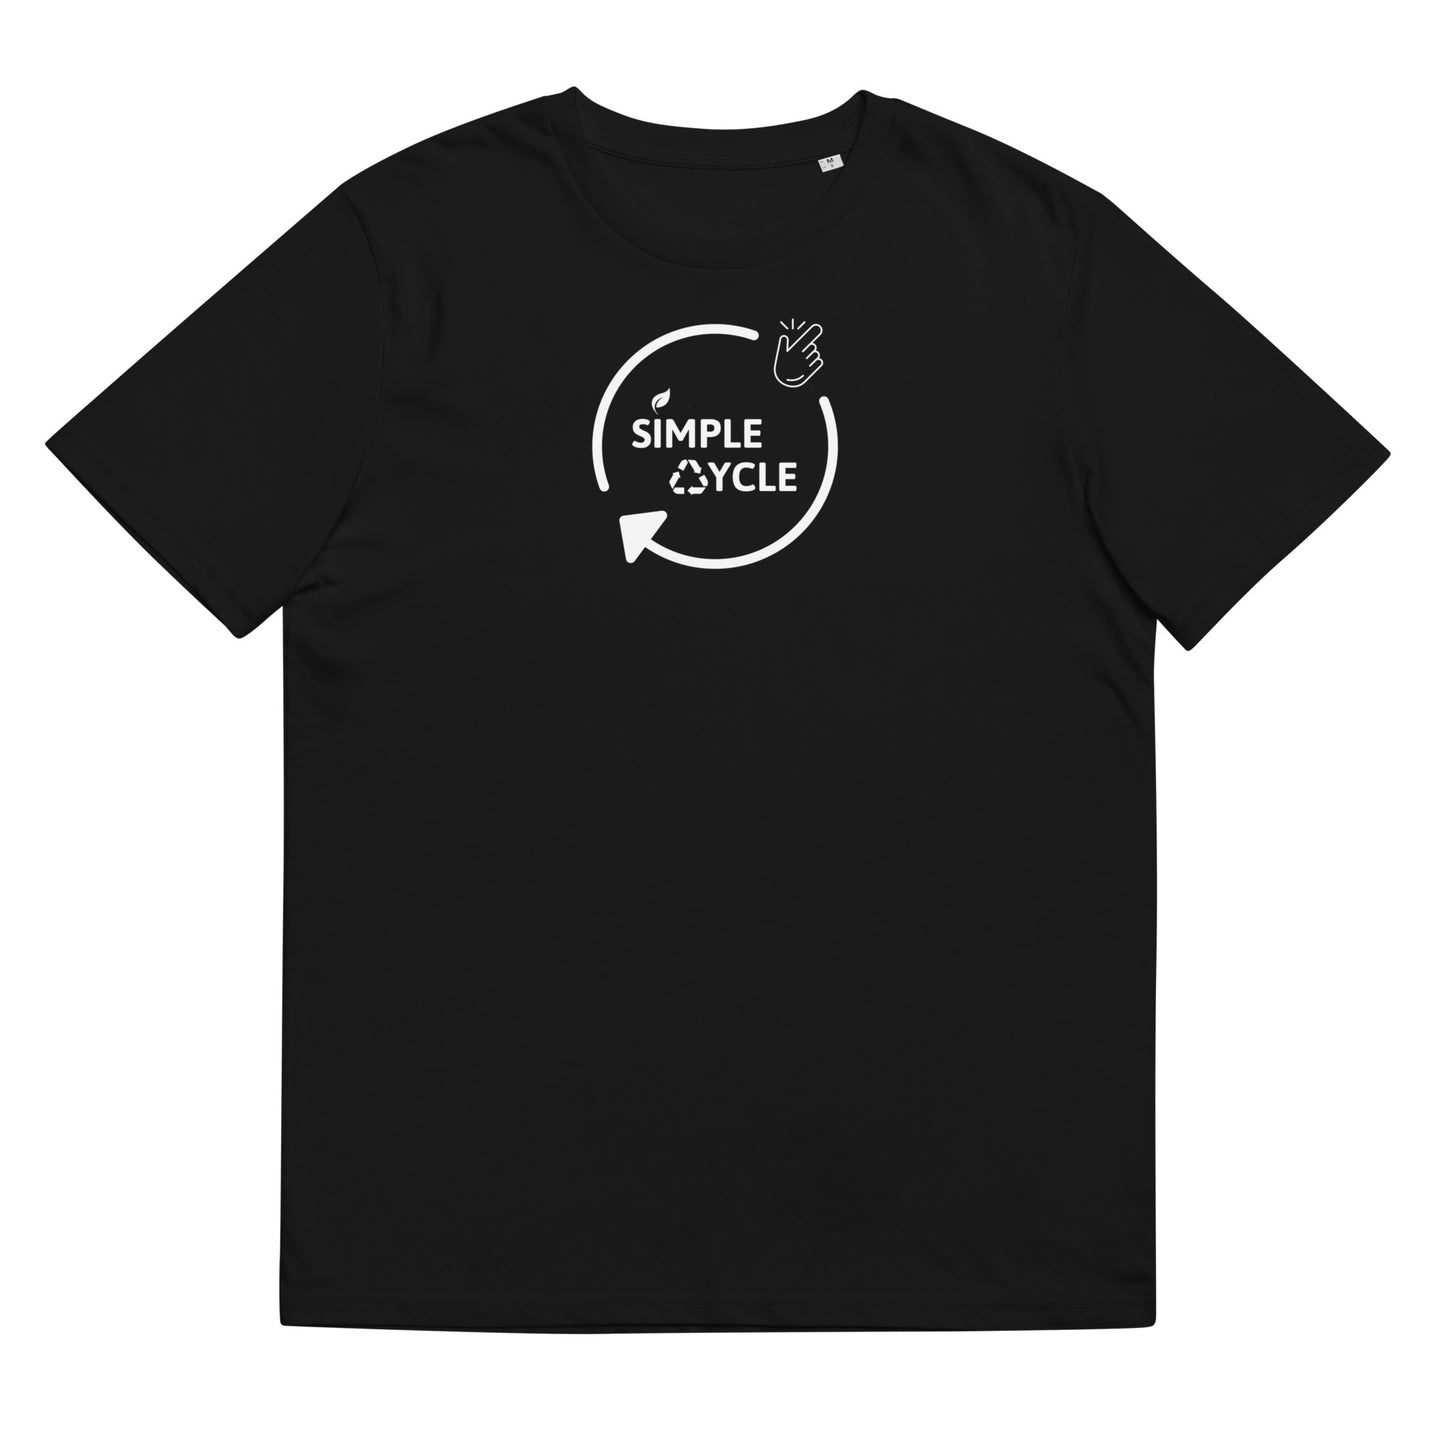 SimpleCycle Unisex Organic Cotton T-Shirt black front